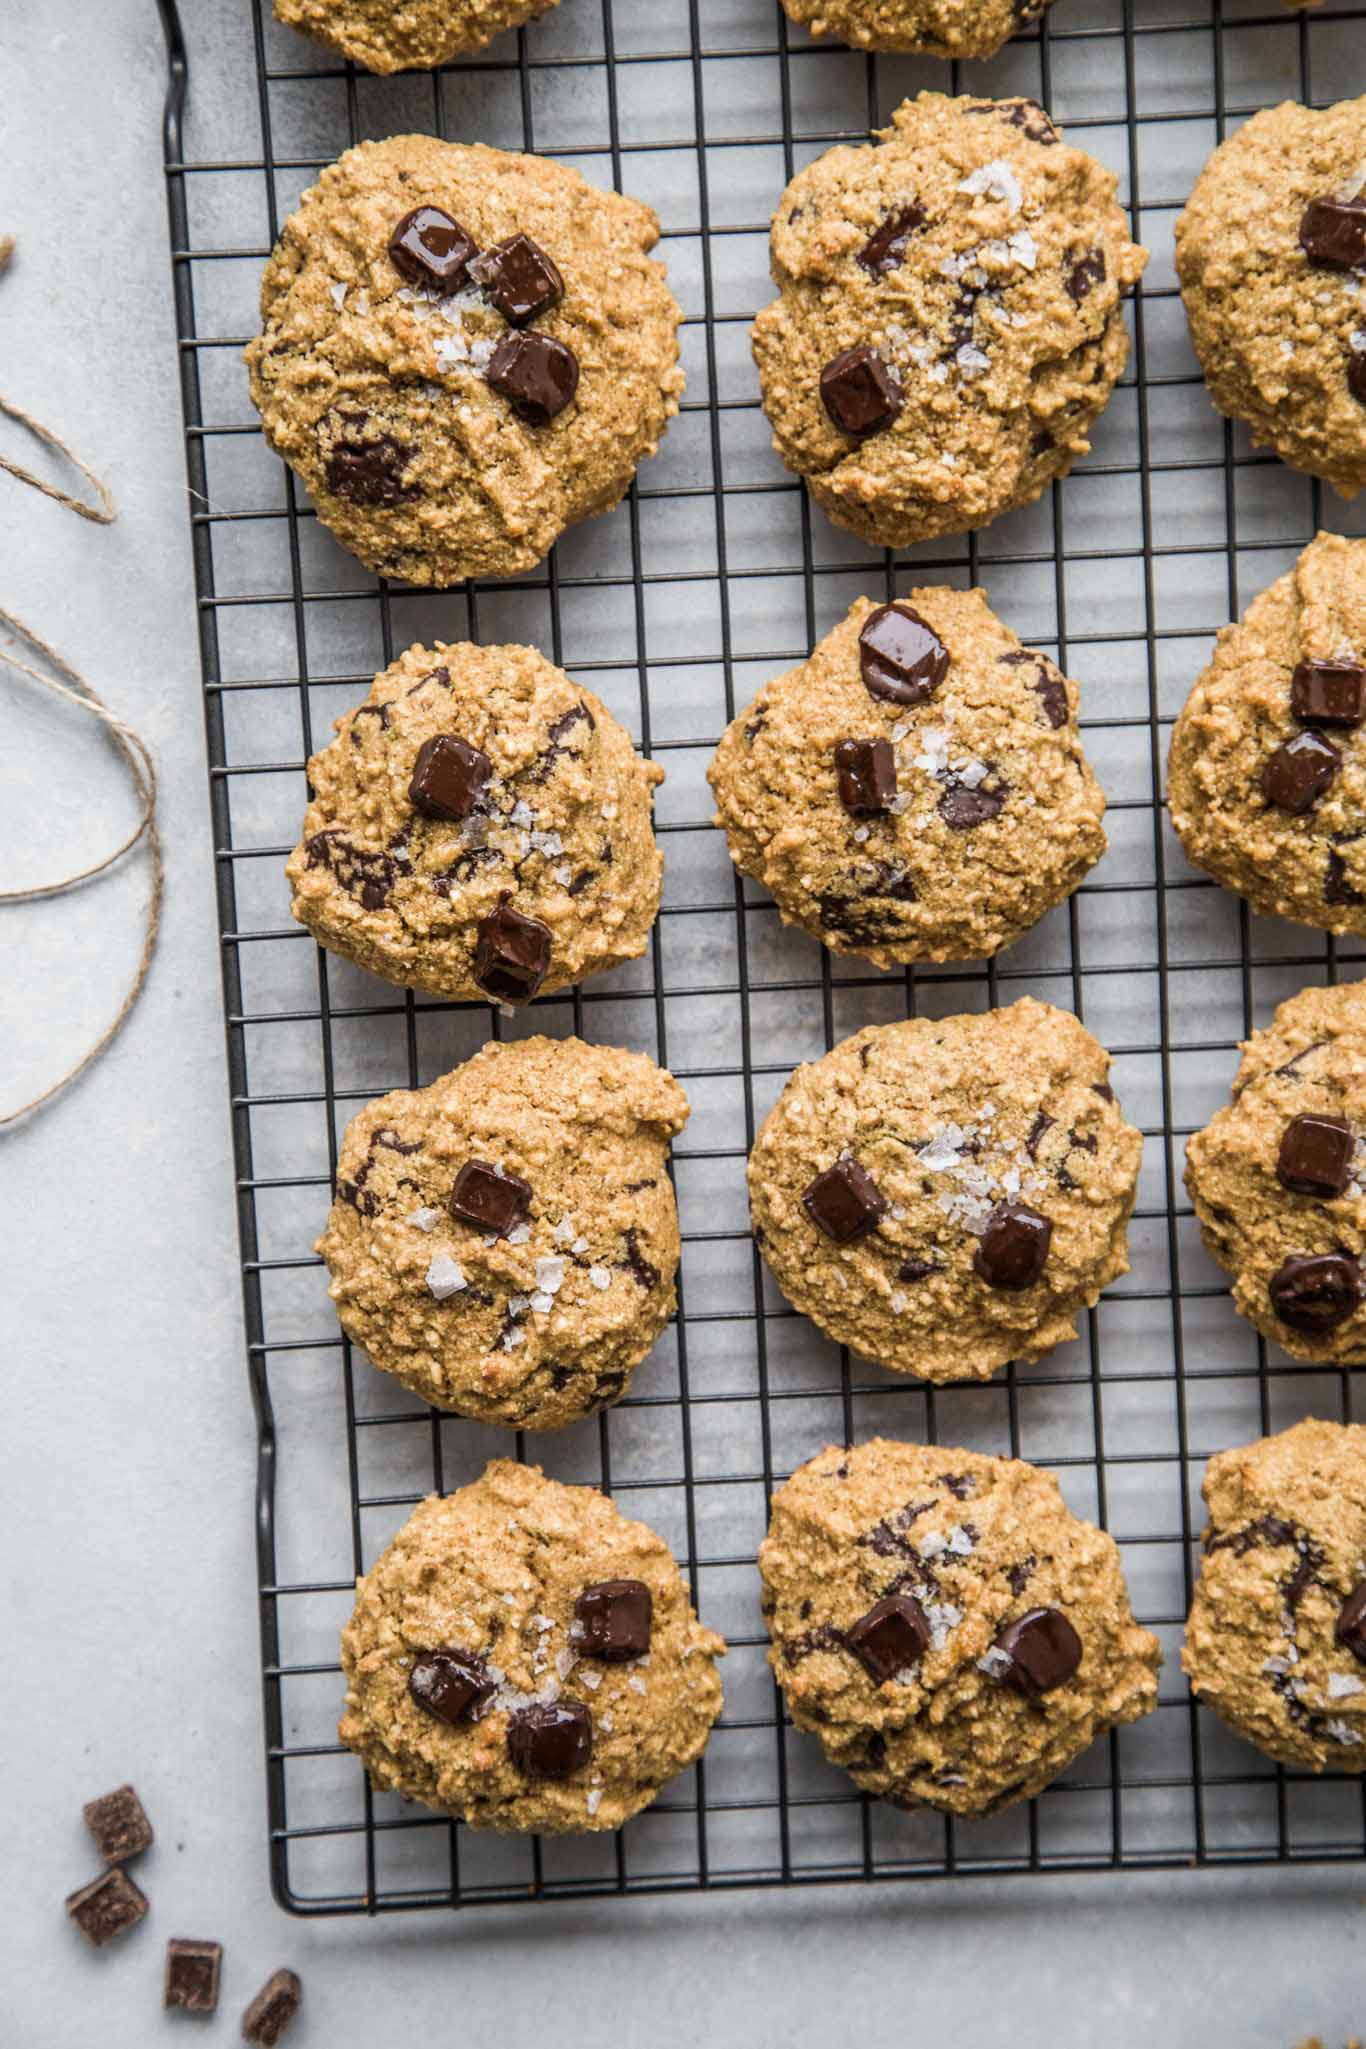 Quinoa Breakfast Cookies with Dark Chocolate & Sea Salt are perfect for breakfasts on the go. Not only are they delicious, but they're packed with protein, whole grains and fiber.